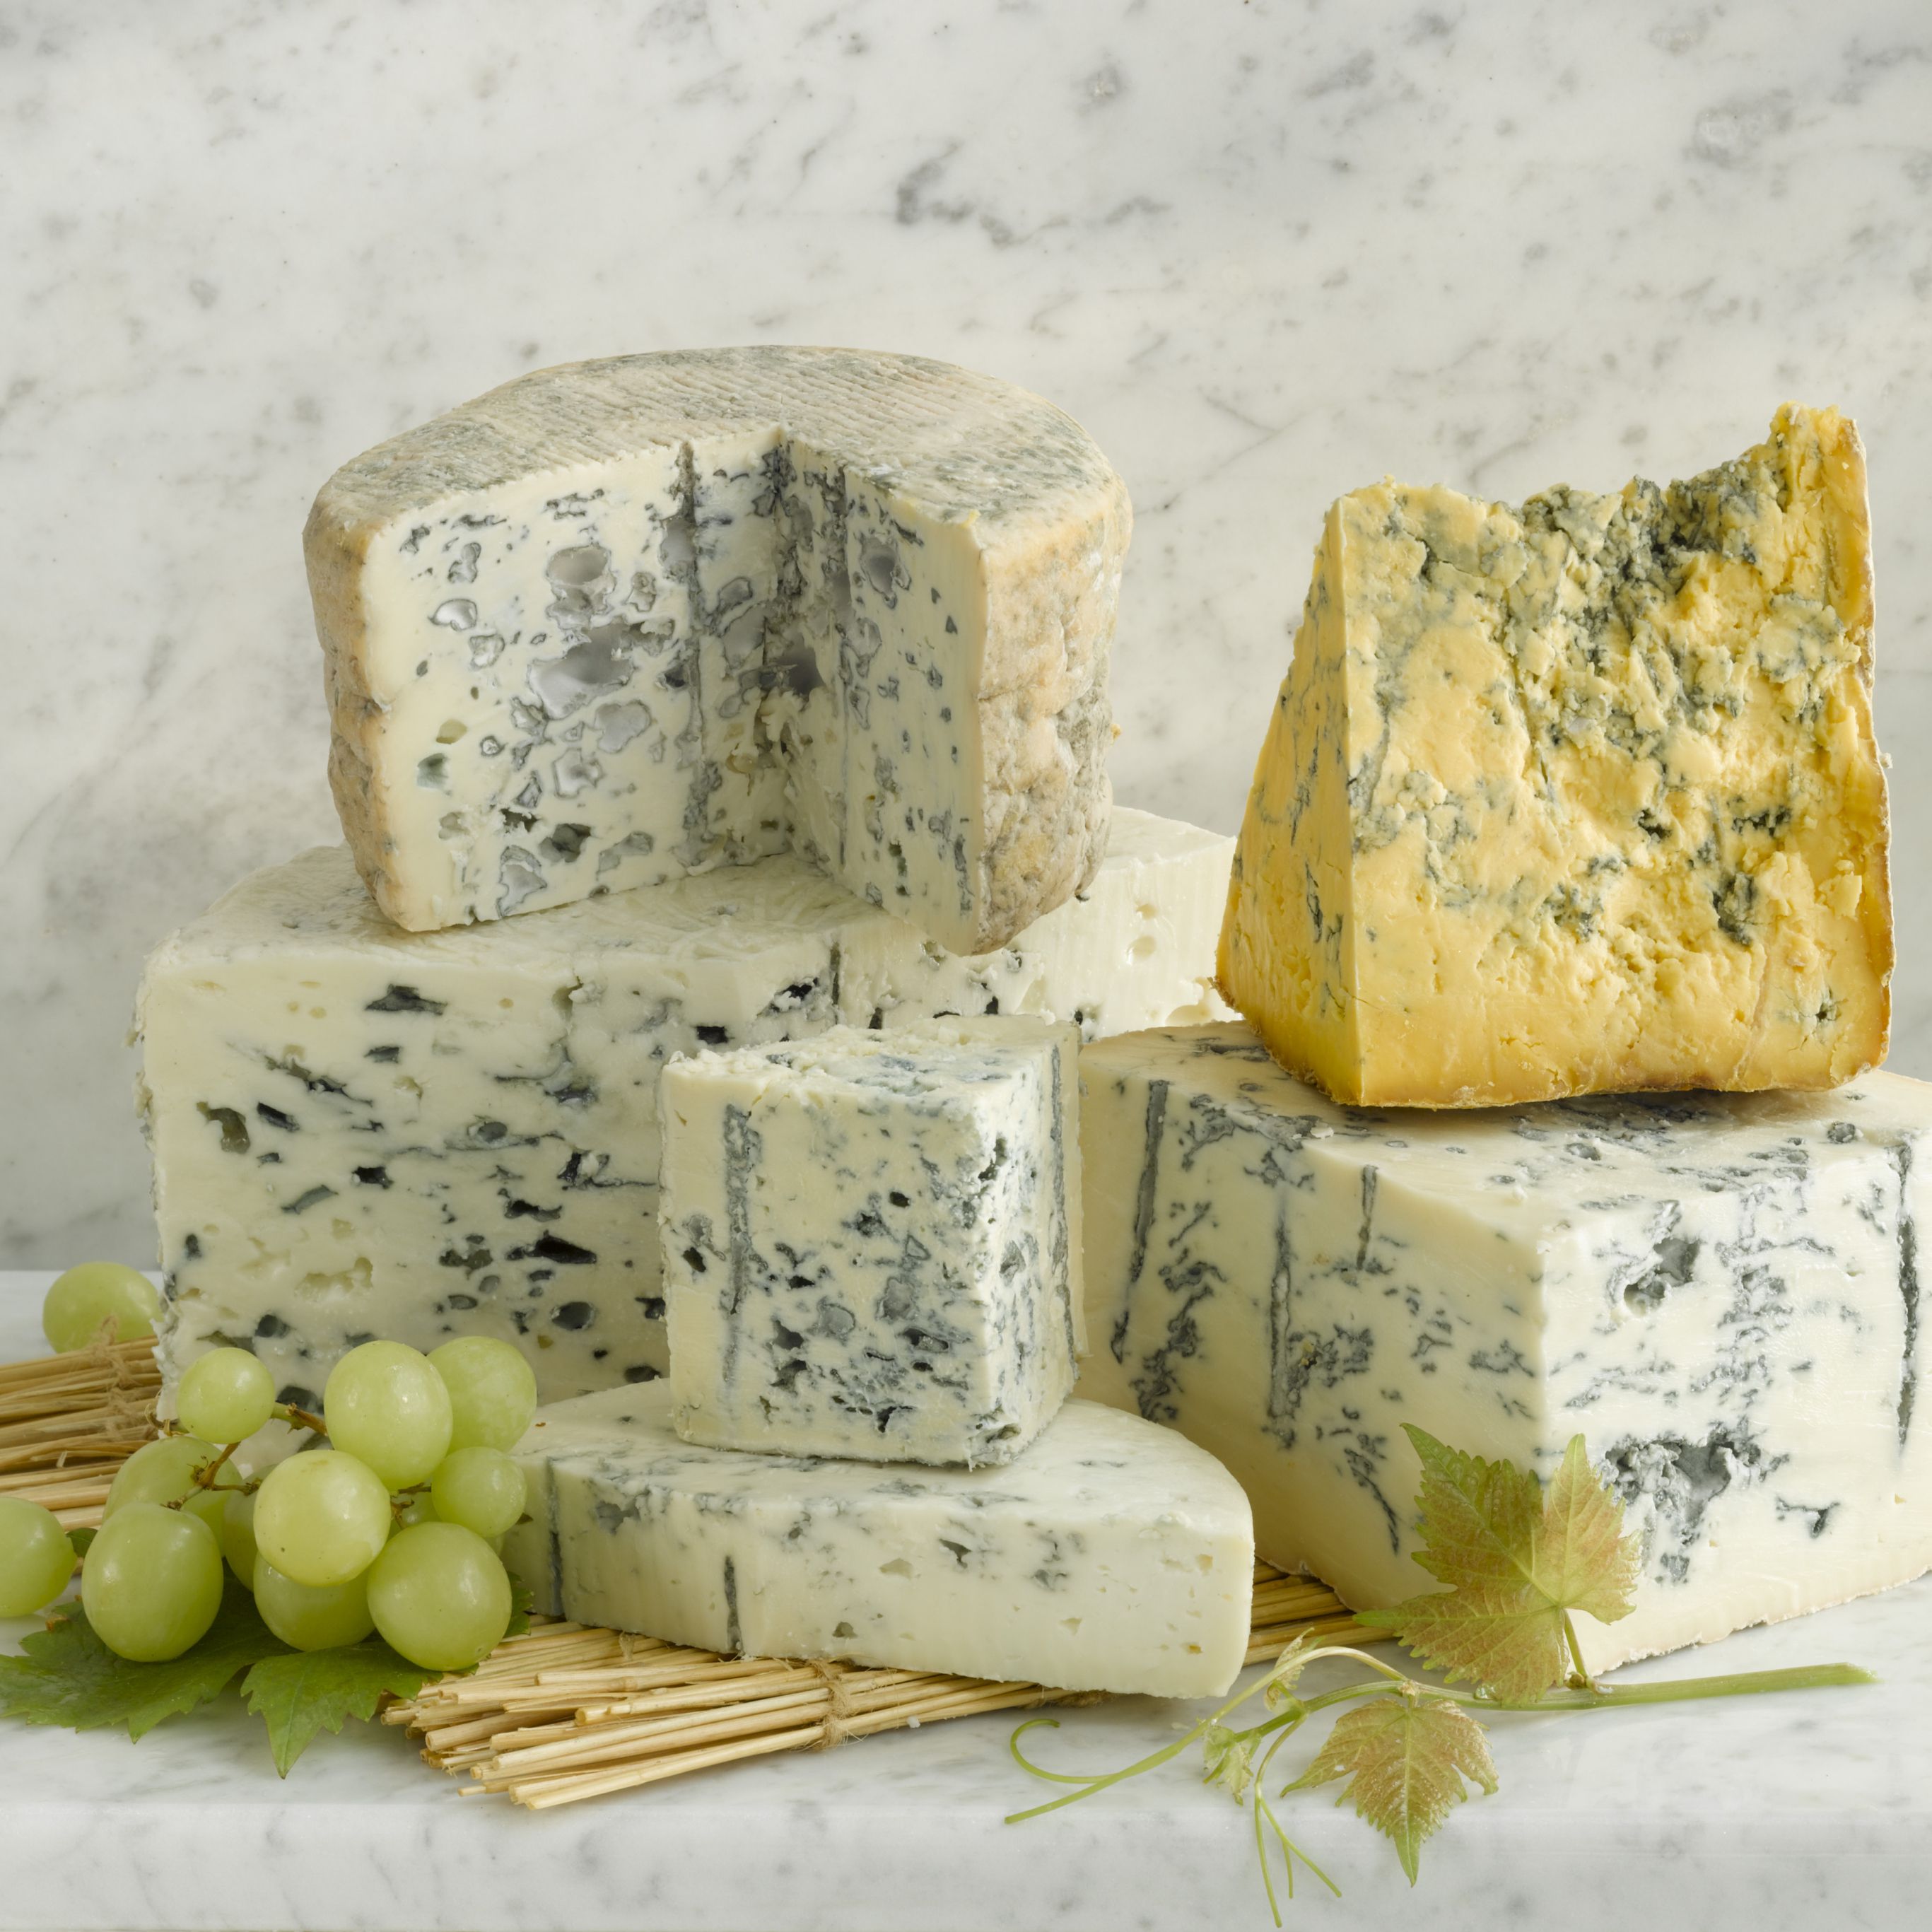 Blue strong cheese; the facts and the fiction